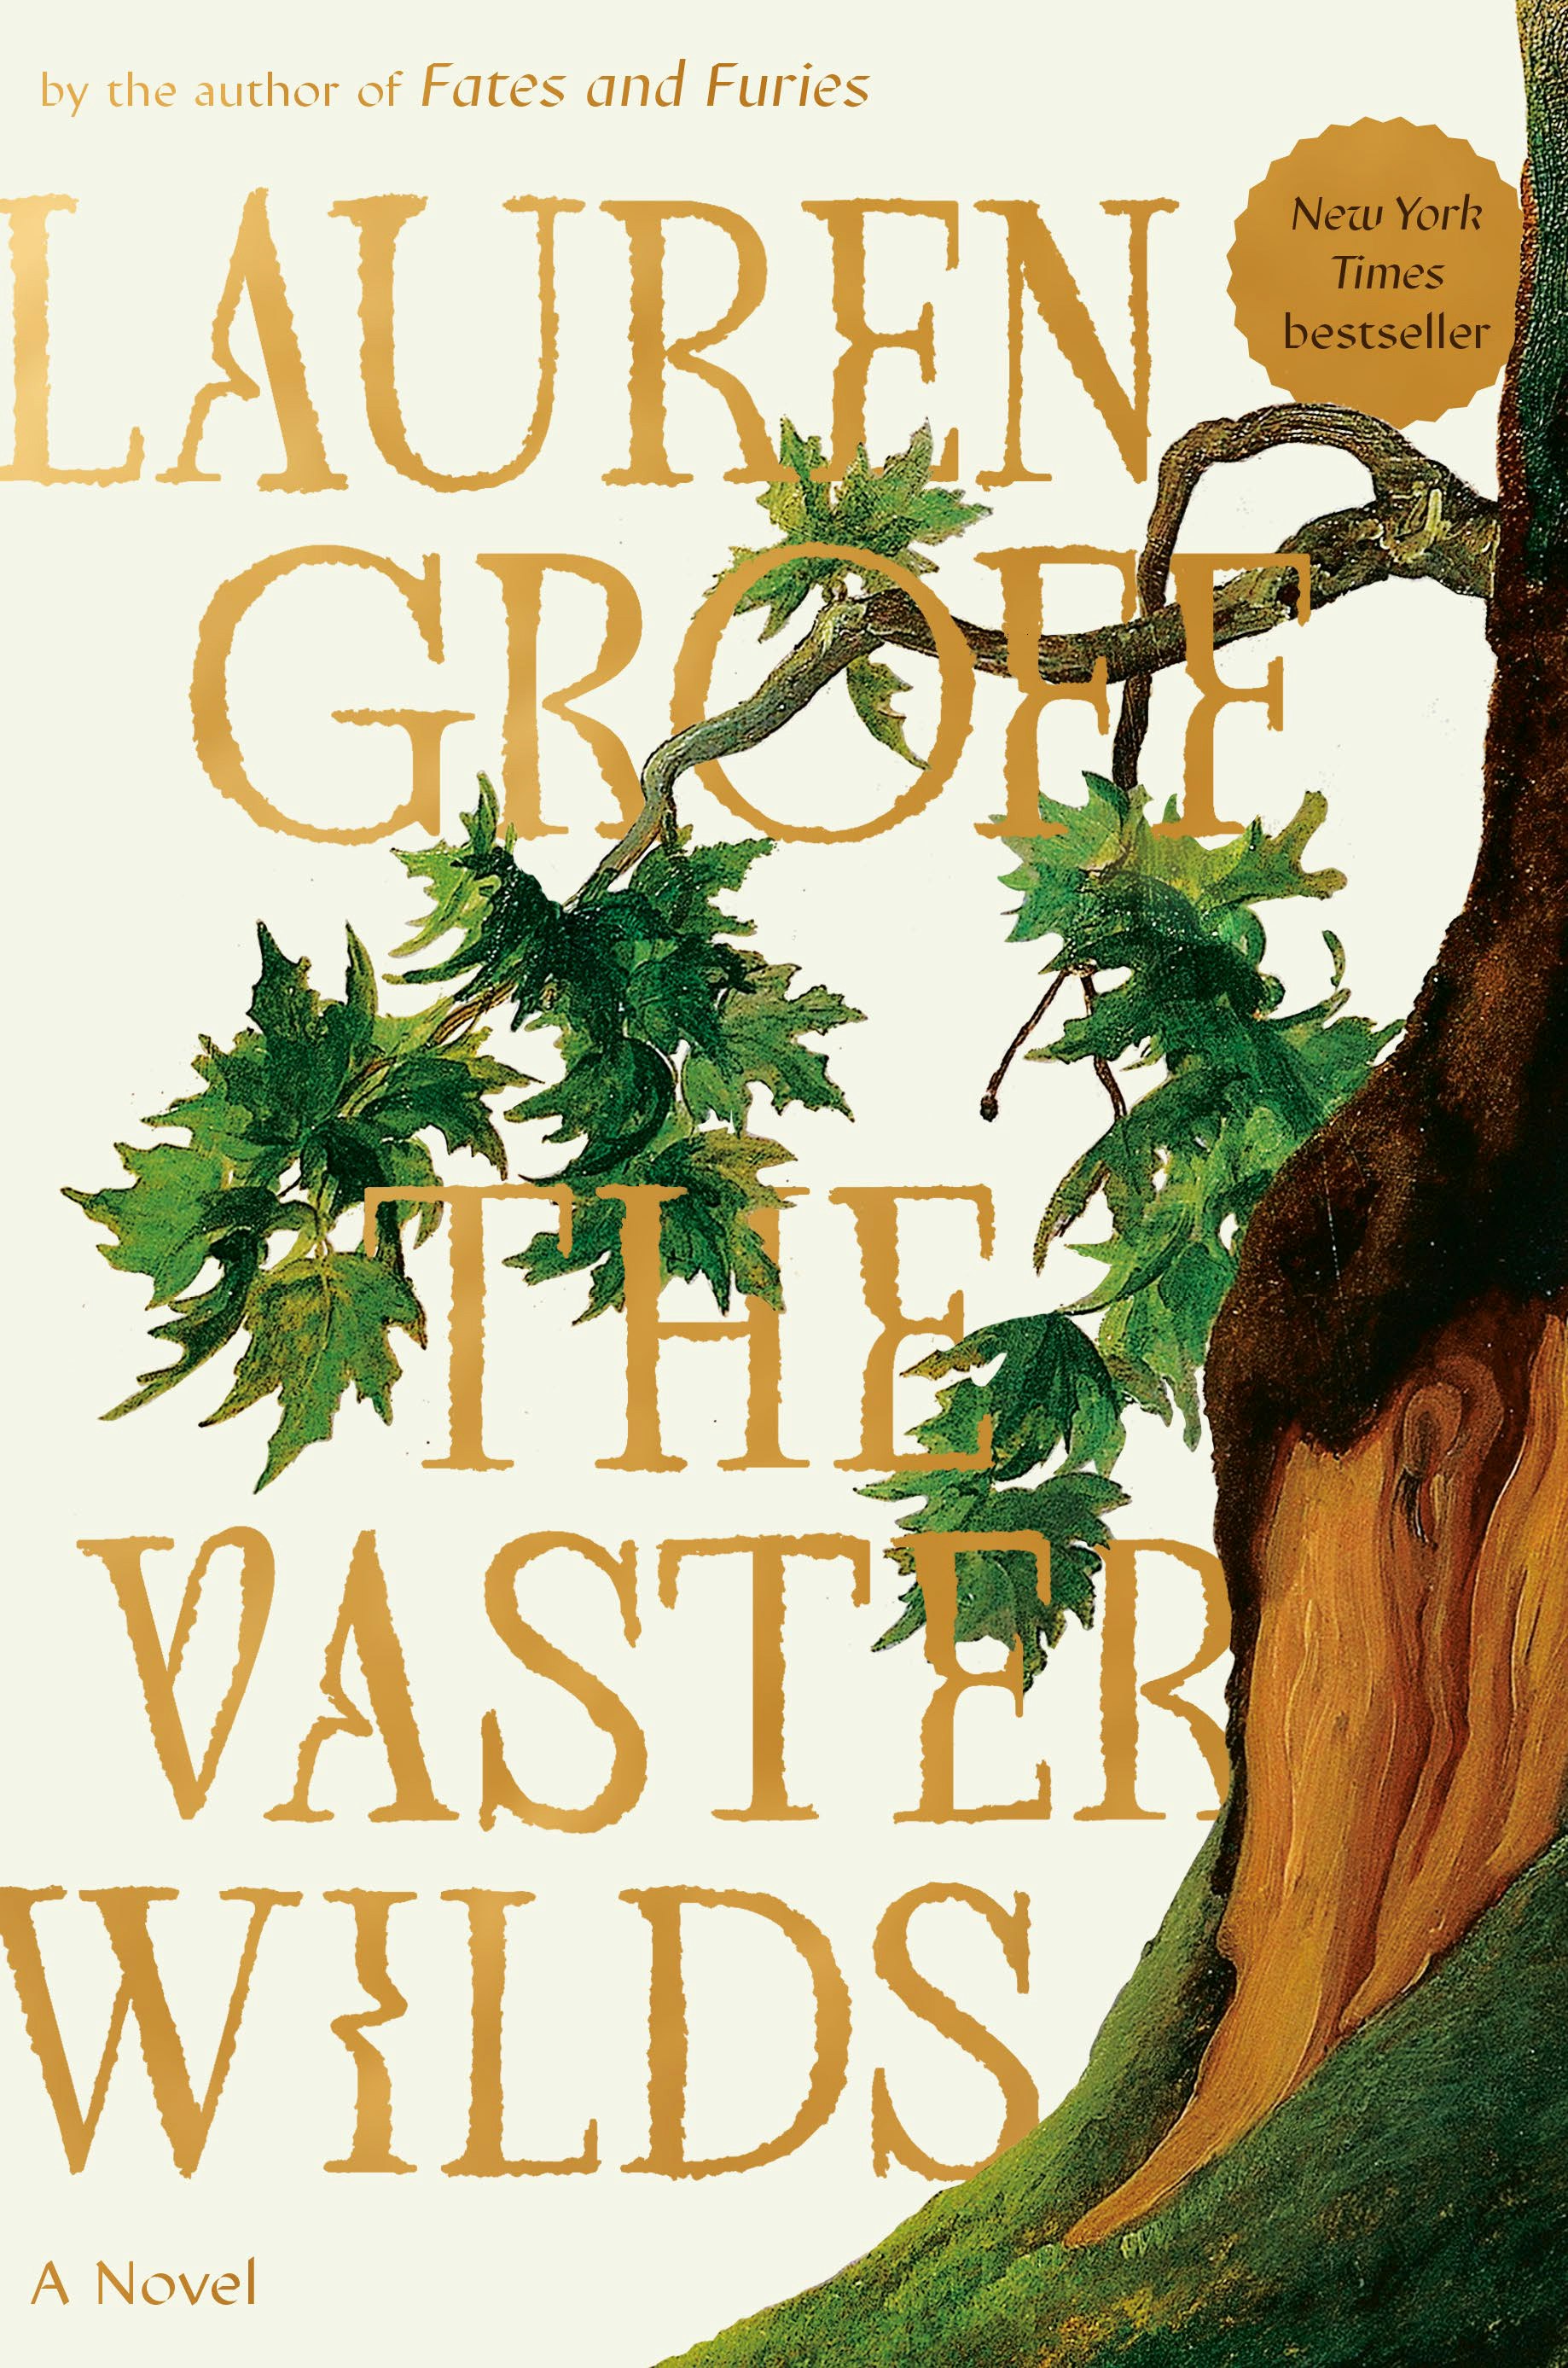 Book cover for The Vaster Wilds, with an illustration of a craggy tree